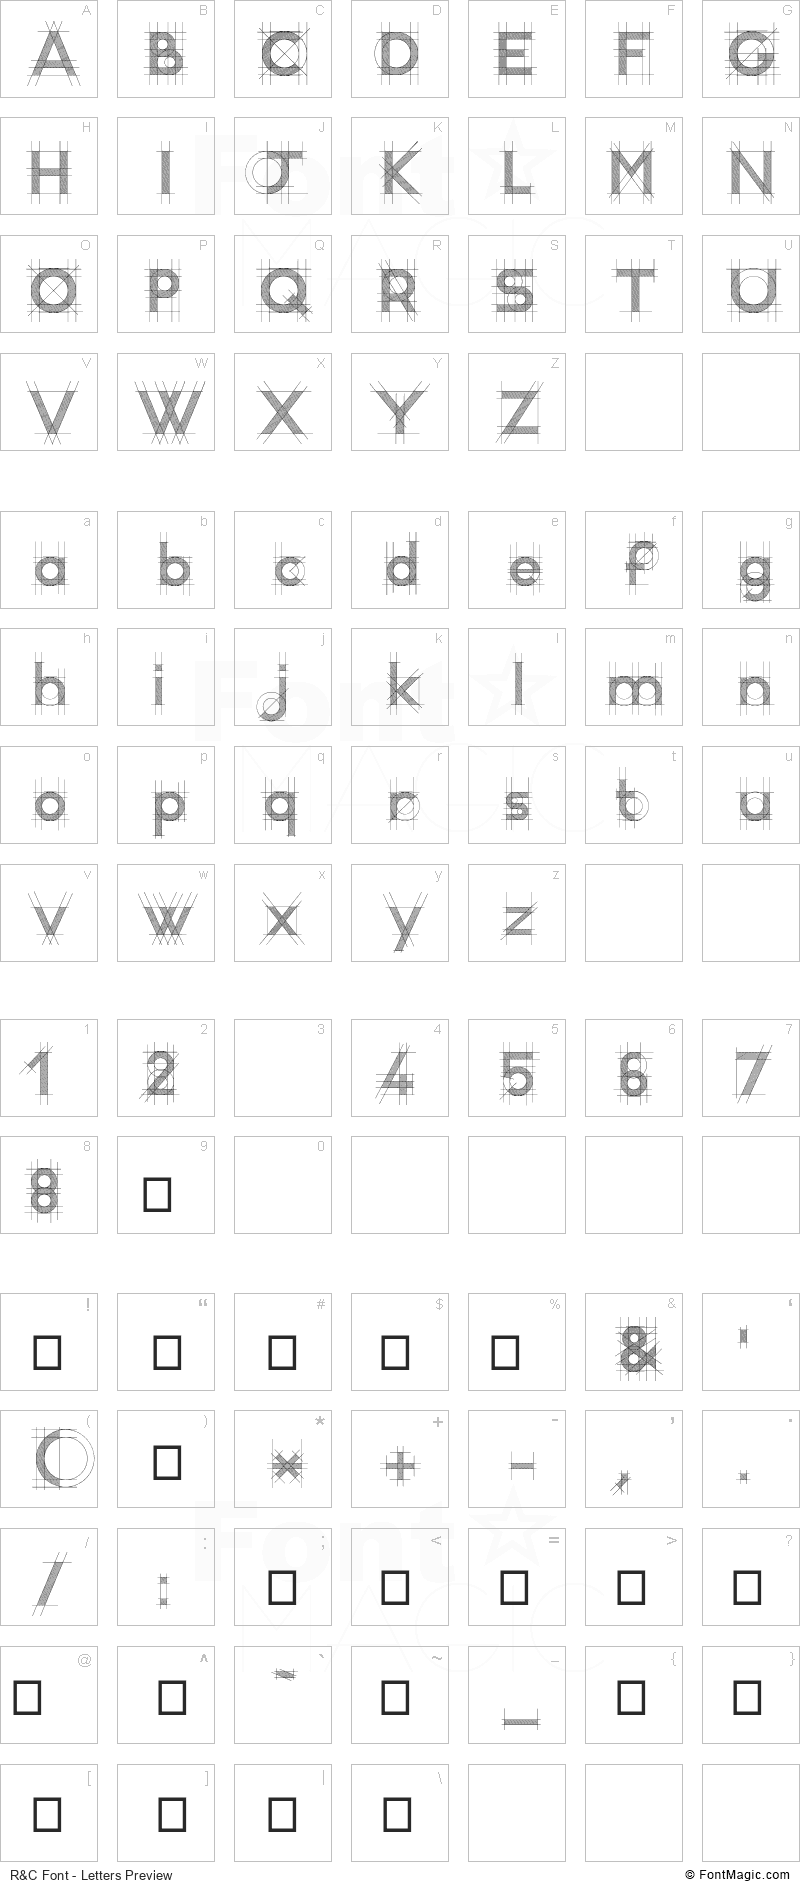 R&C Font - All Latters Preview Chart